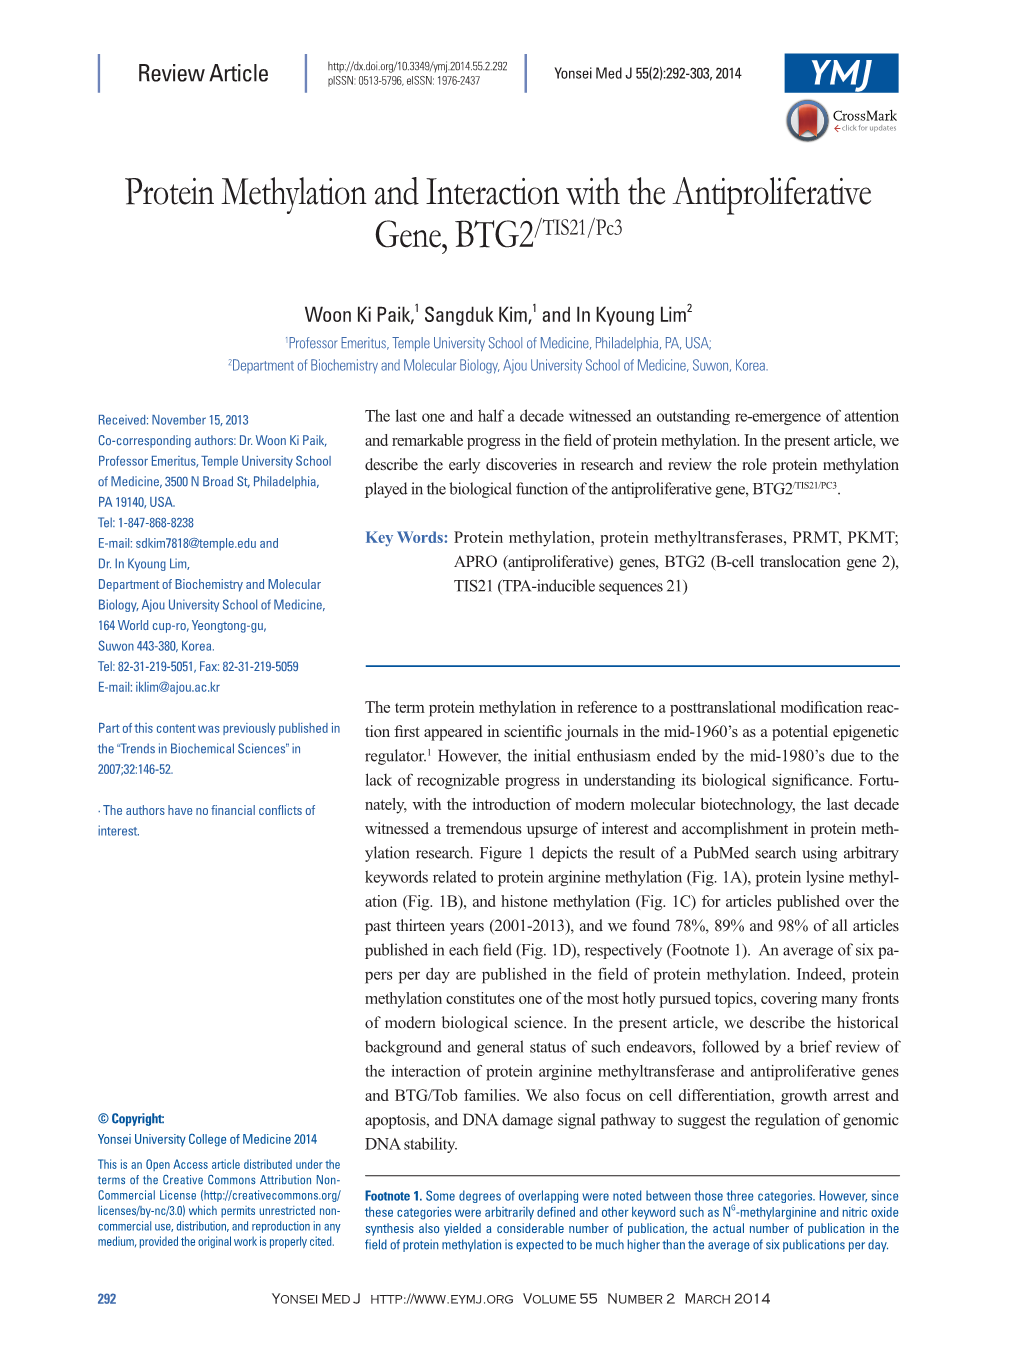 Protein Methylation and Interaction with the Antiproliferative Gene, BTG2/TIS21/Pc3